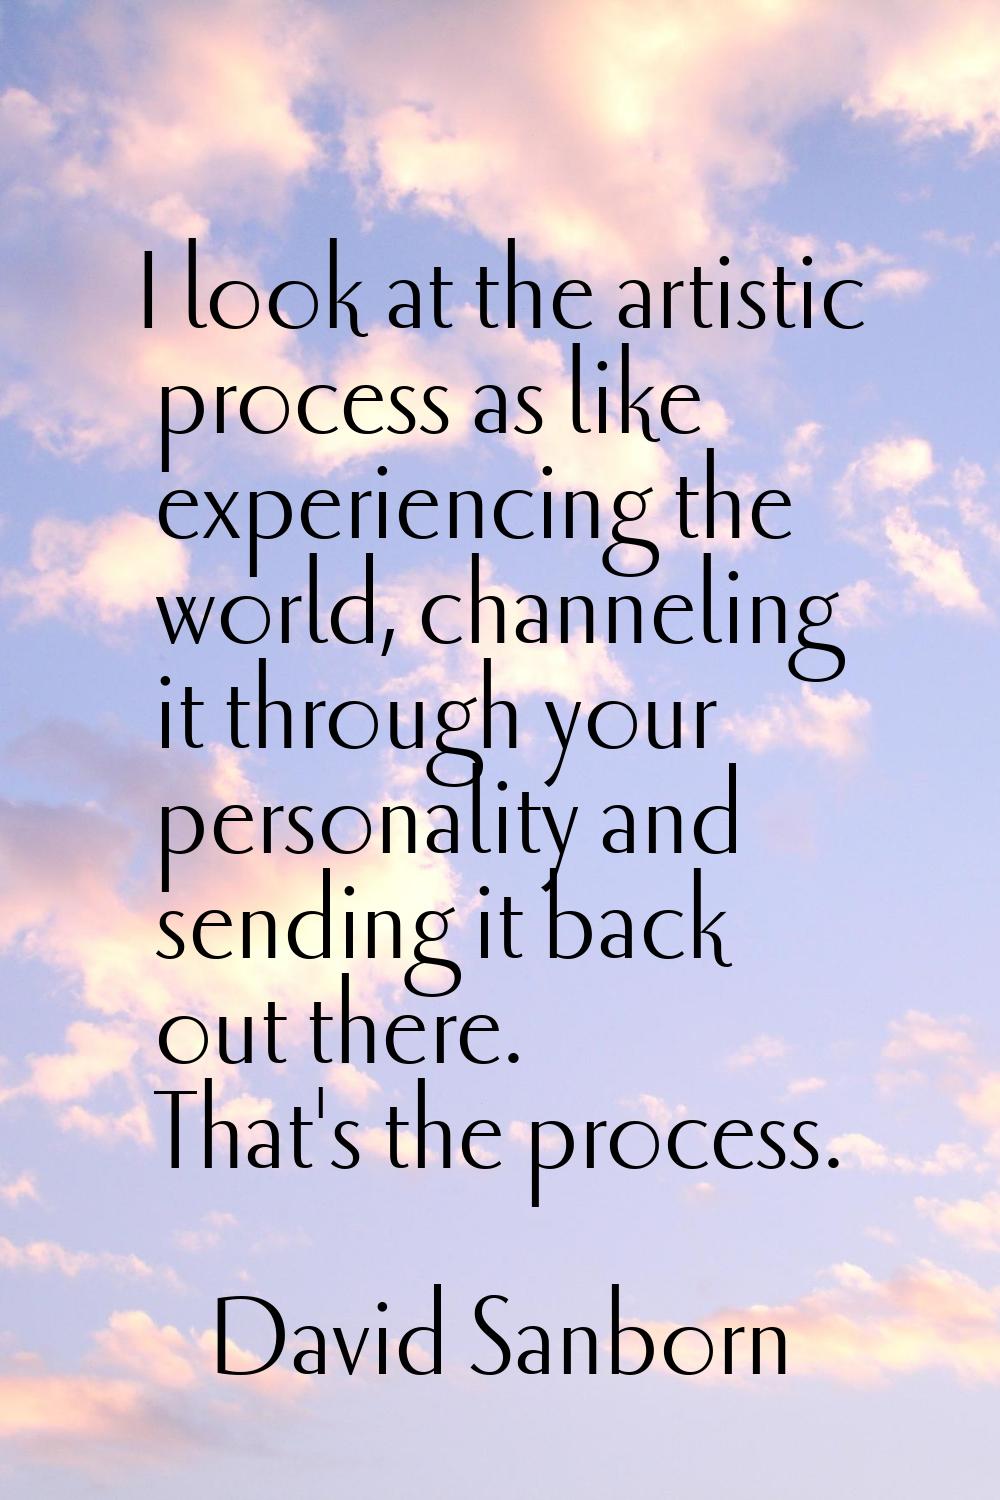 I look at the artistic process as like experiencing the world, channeling it through your personali